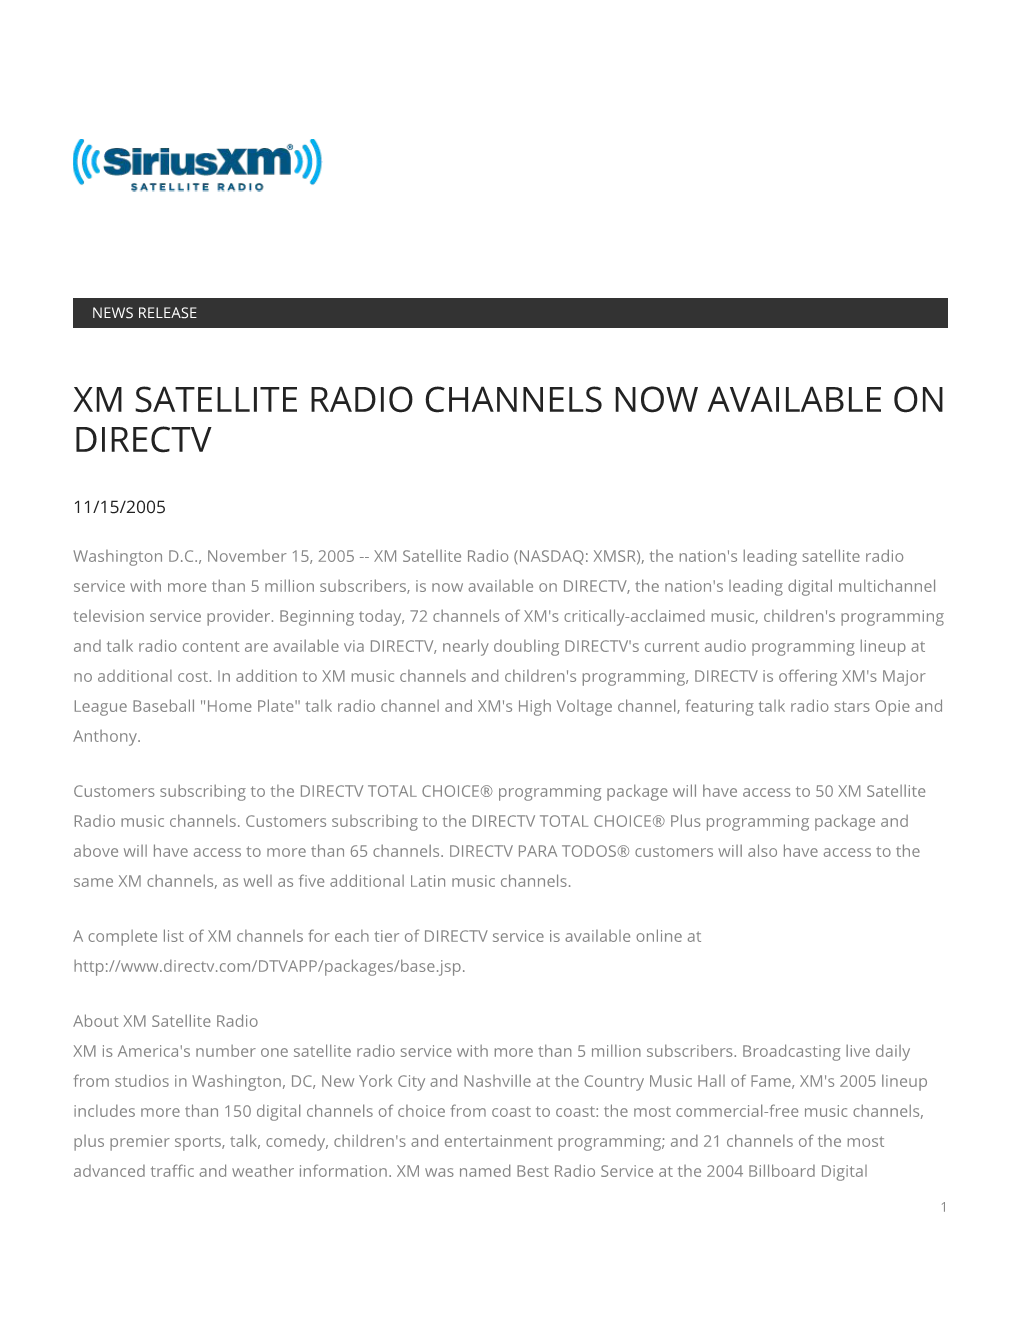 Xm Satellite Radio Channels Now Available on Directv